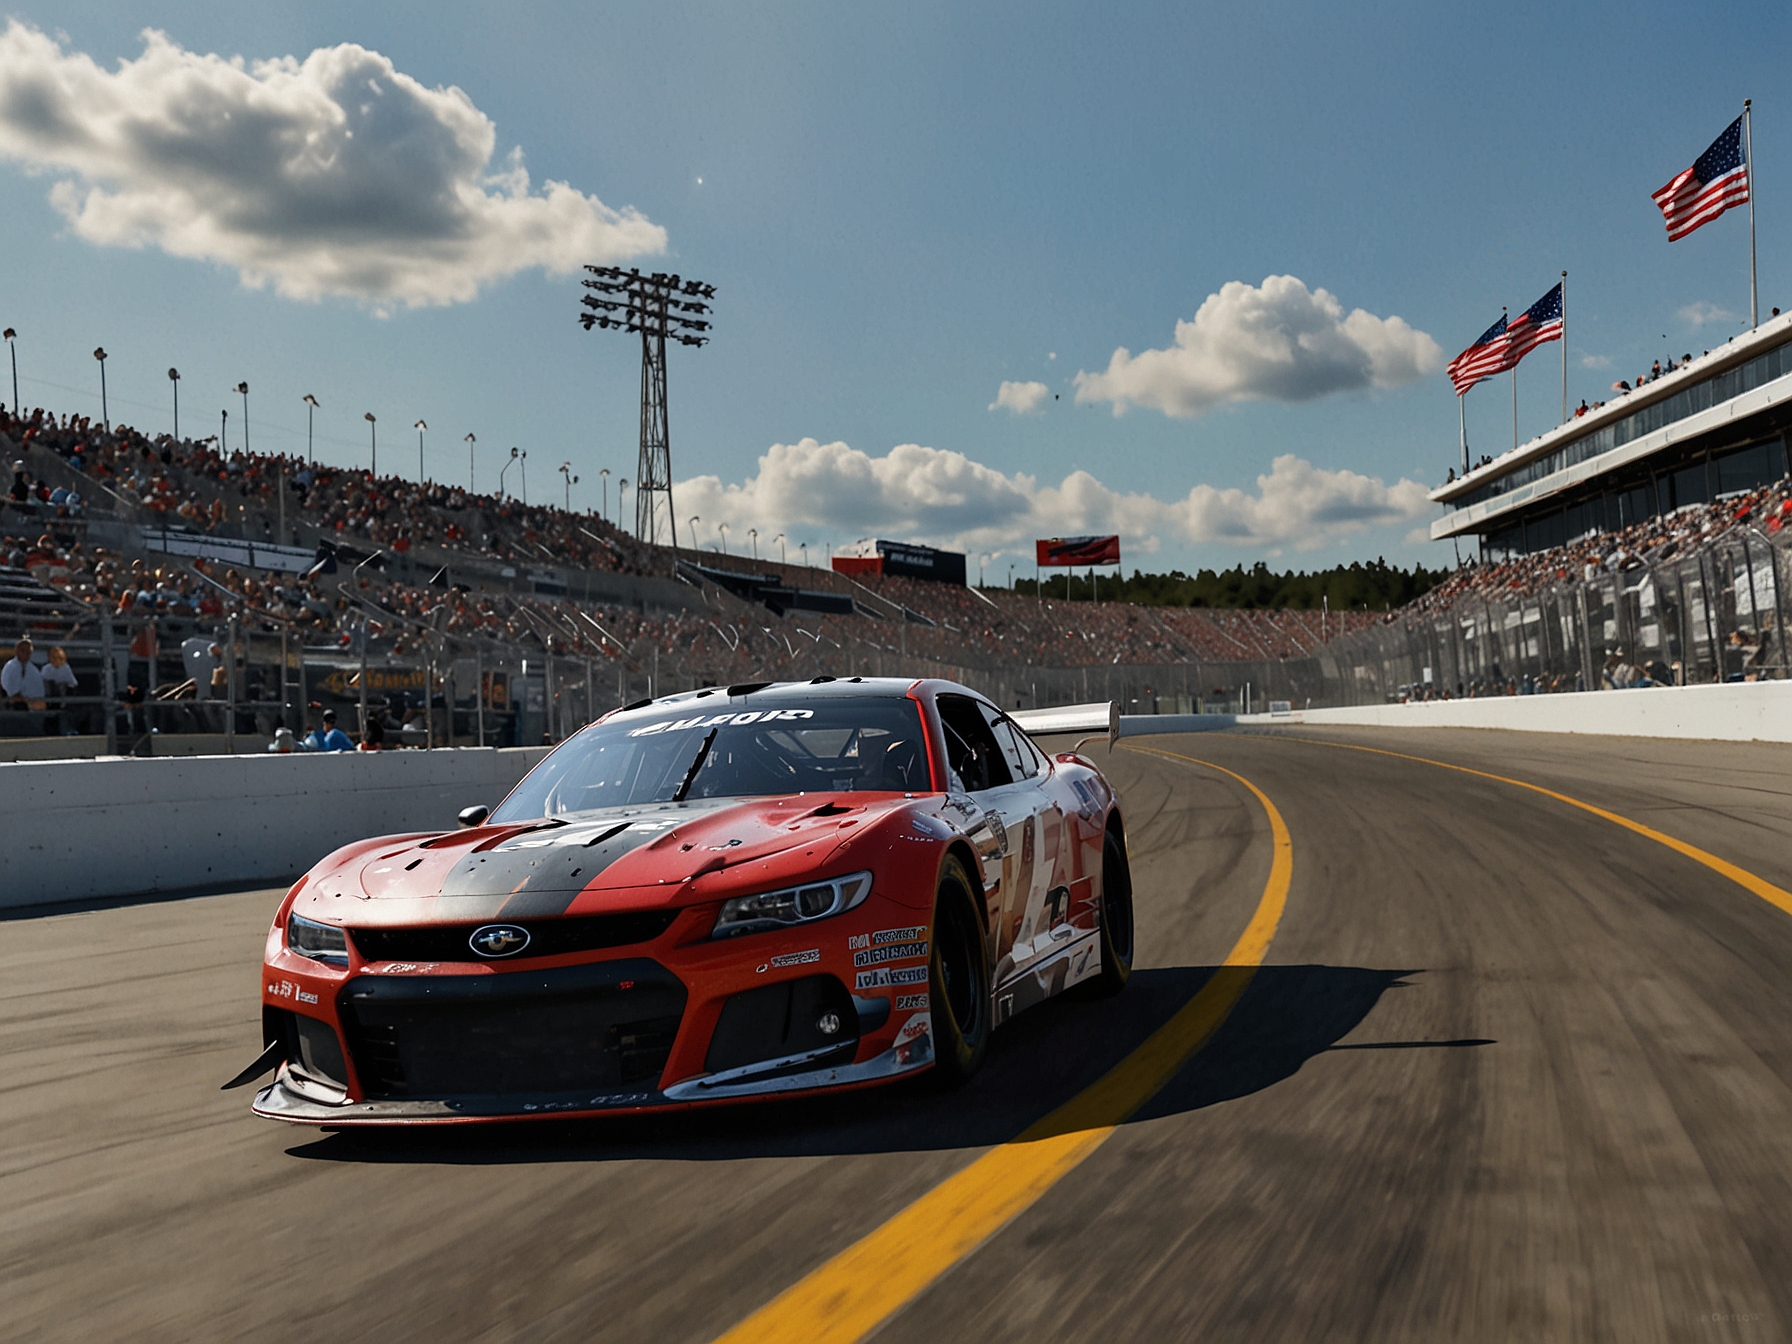 Chase Briscoe maneuvering his No. 14 Stewart-Haas Racing car expertly around New Hampshire Motor Speedway's challenging track, demonstrating his driving prowess.